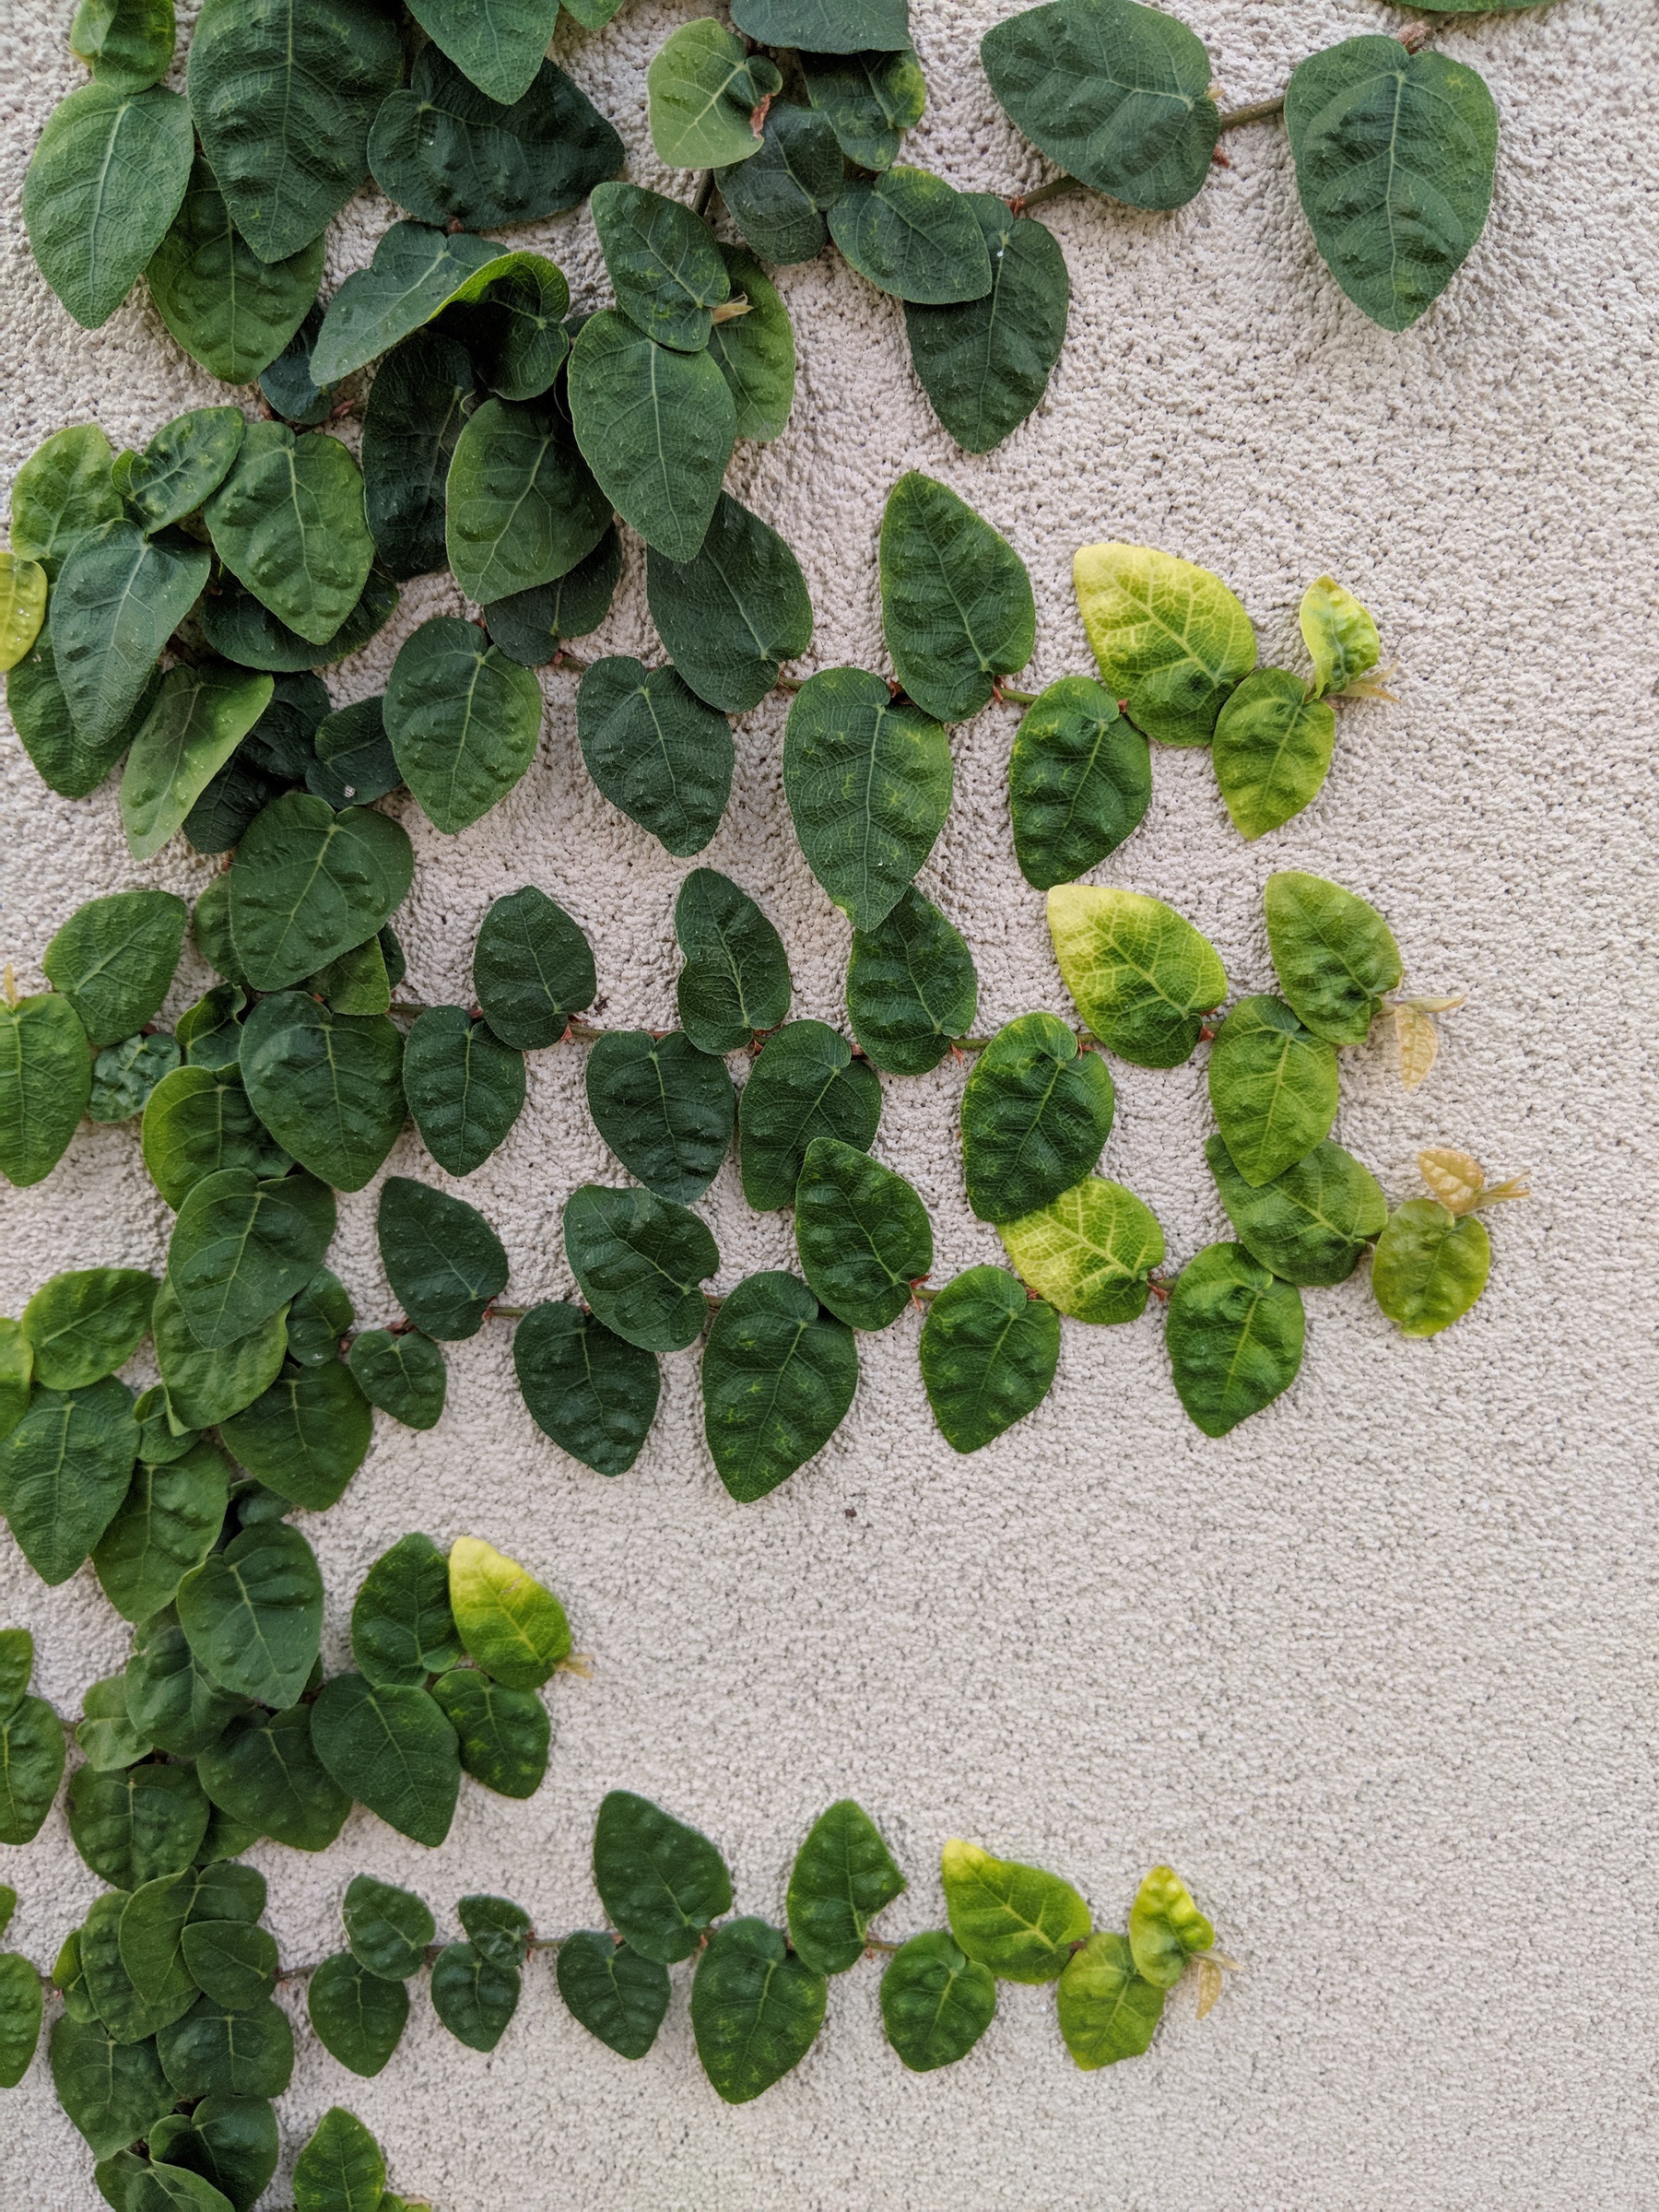 Branches of ivy reach across the white wall in tidy rows. The old leaves are dark green, the new leaves are pale, almost yellow.